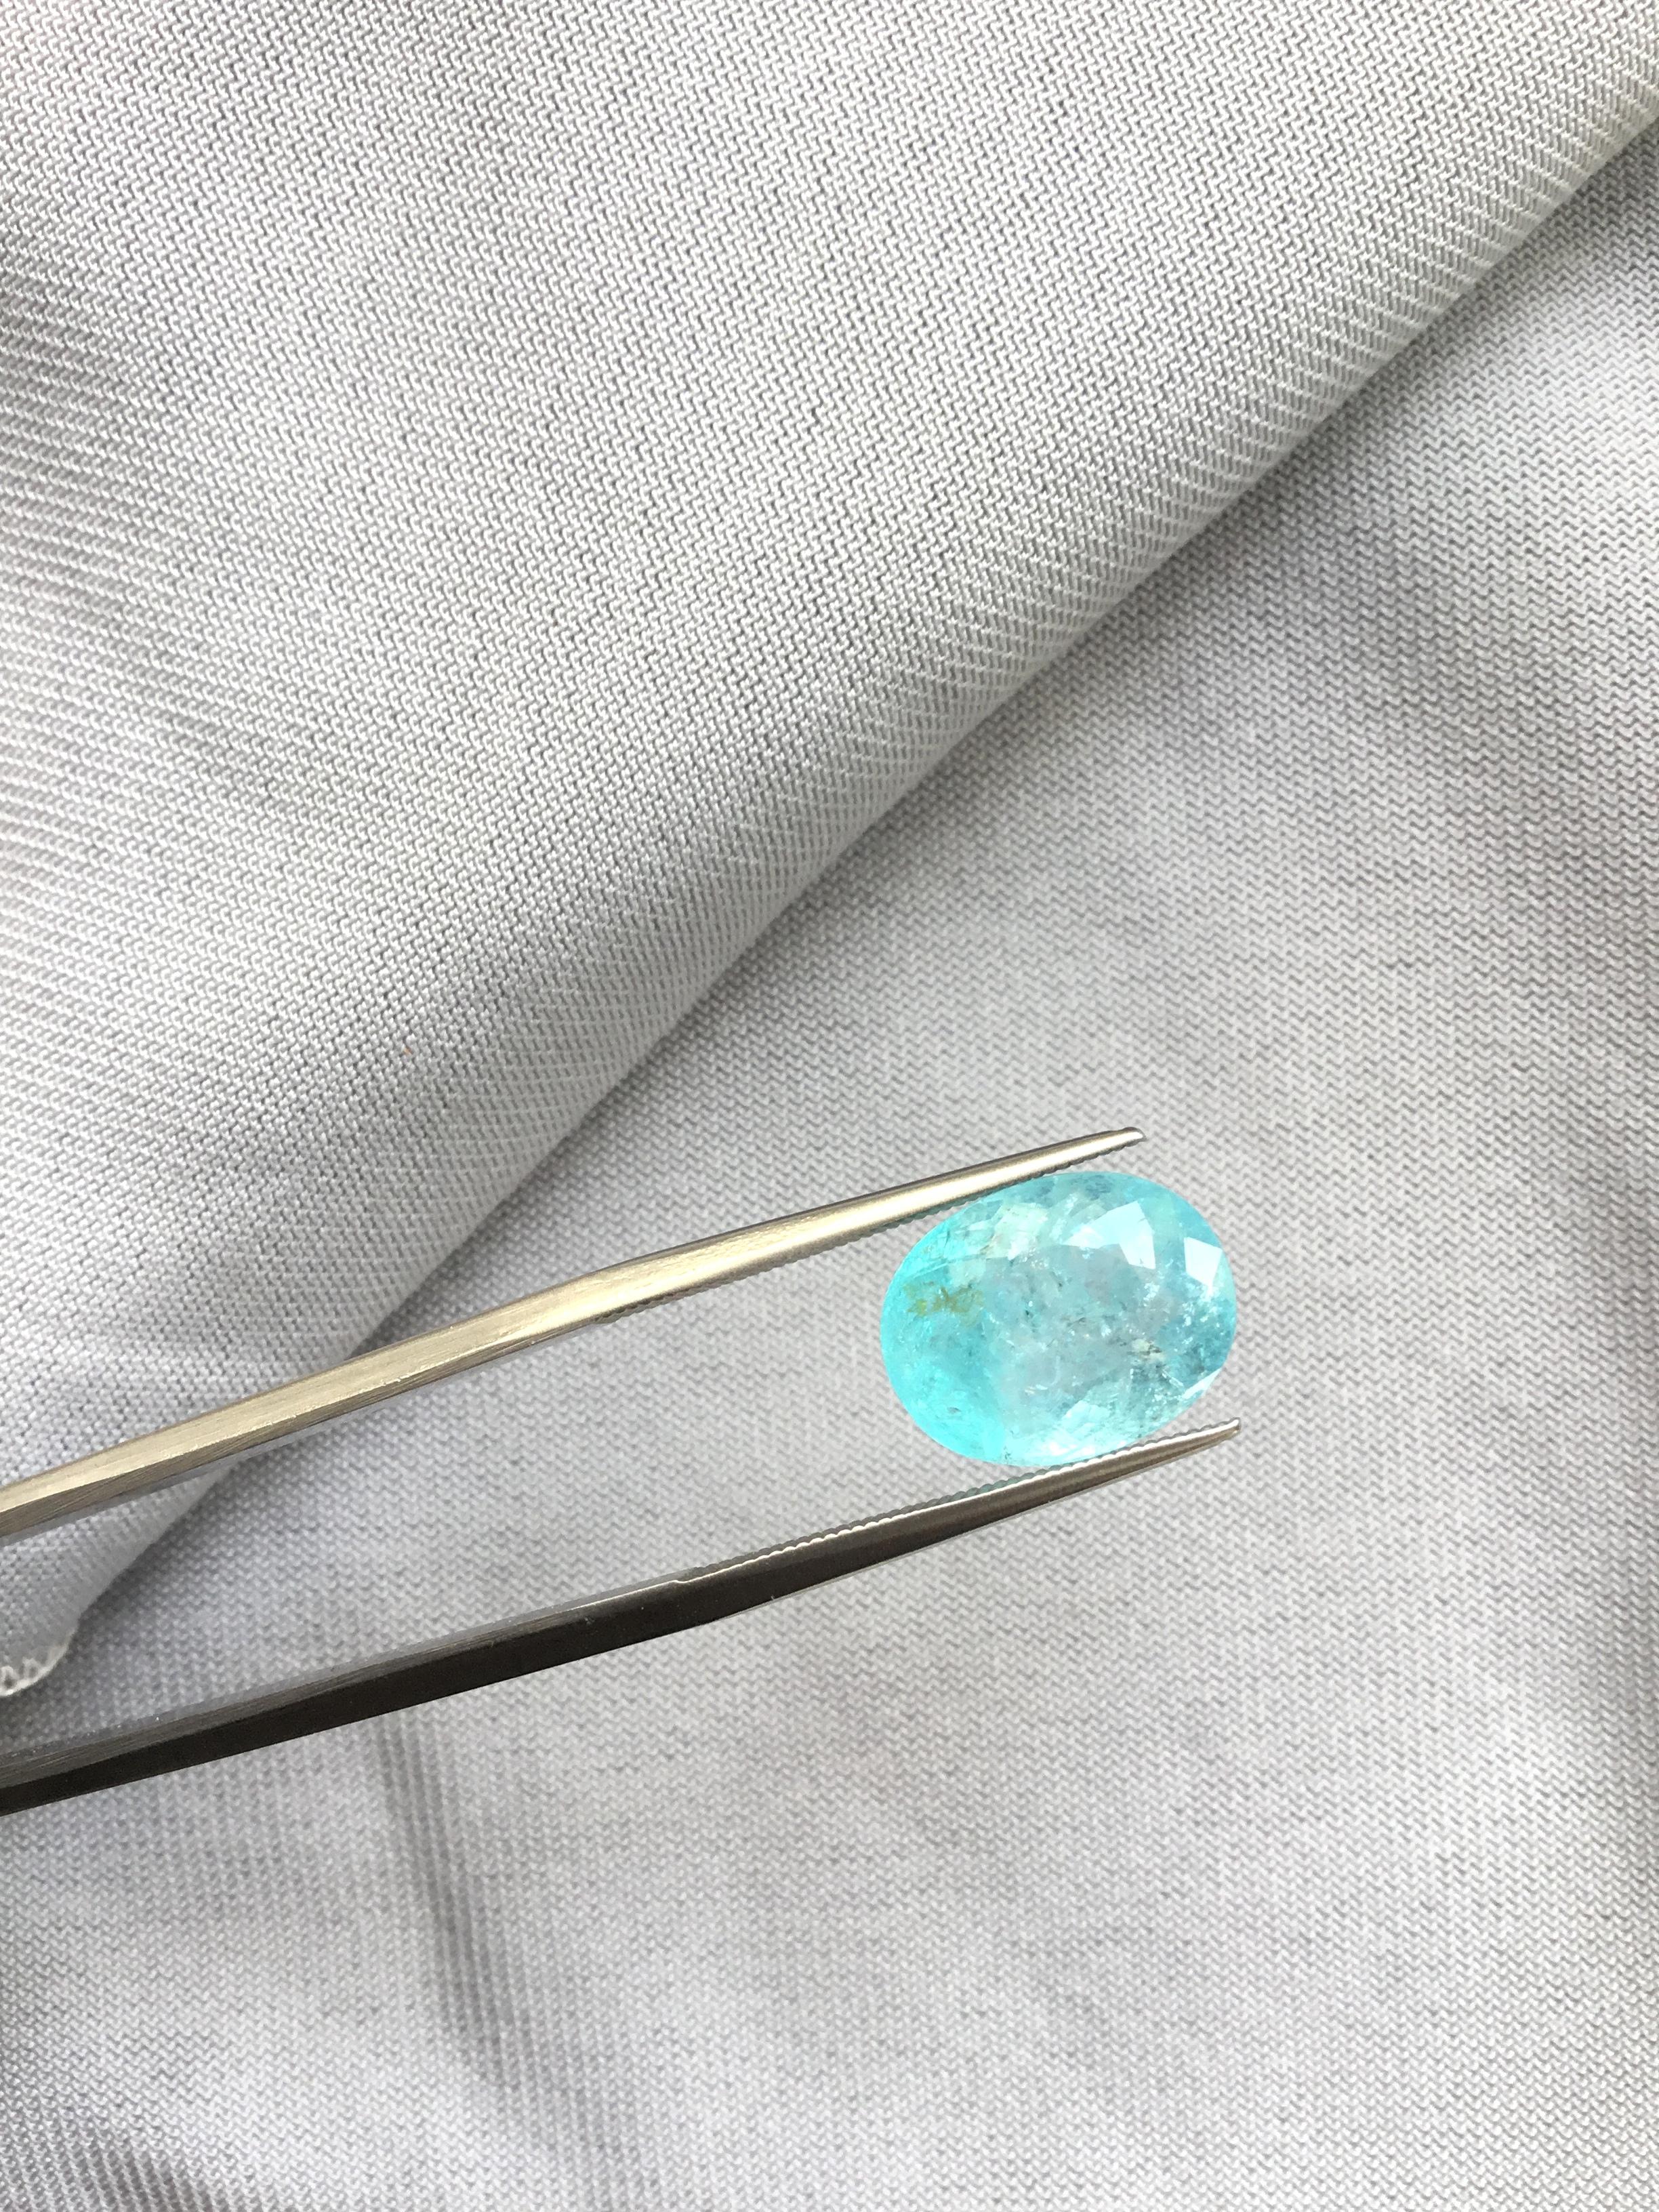 Exceptional 5.30 Carats Paraiba Tourmaline Oval Cut Stone for Fine Jewelry